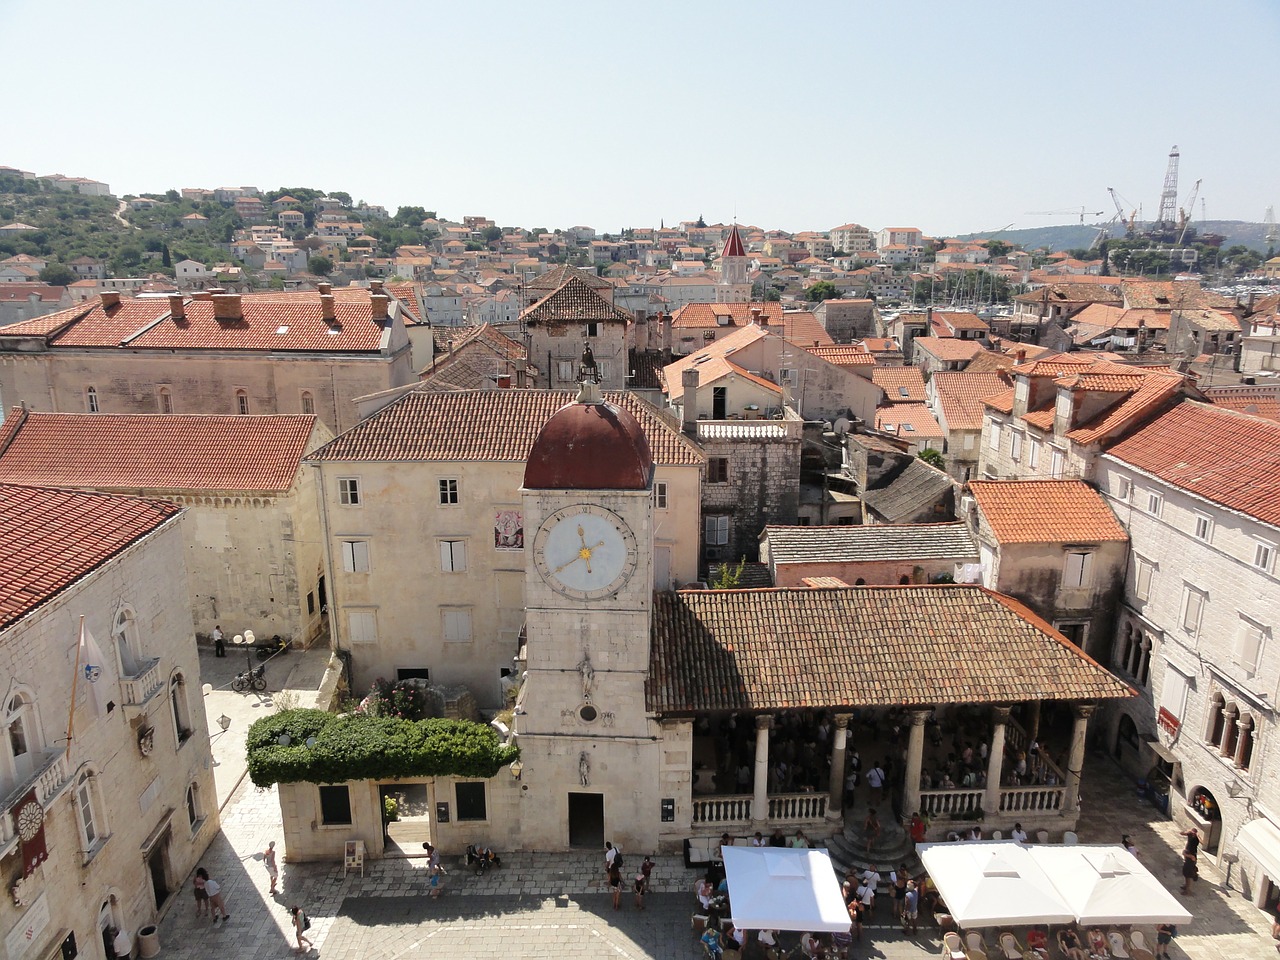 above-the-roofs-of-trogir-73175_1280.jpg